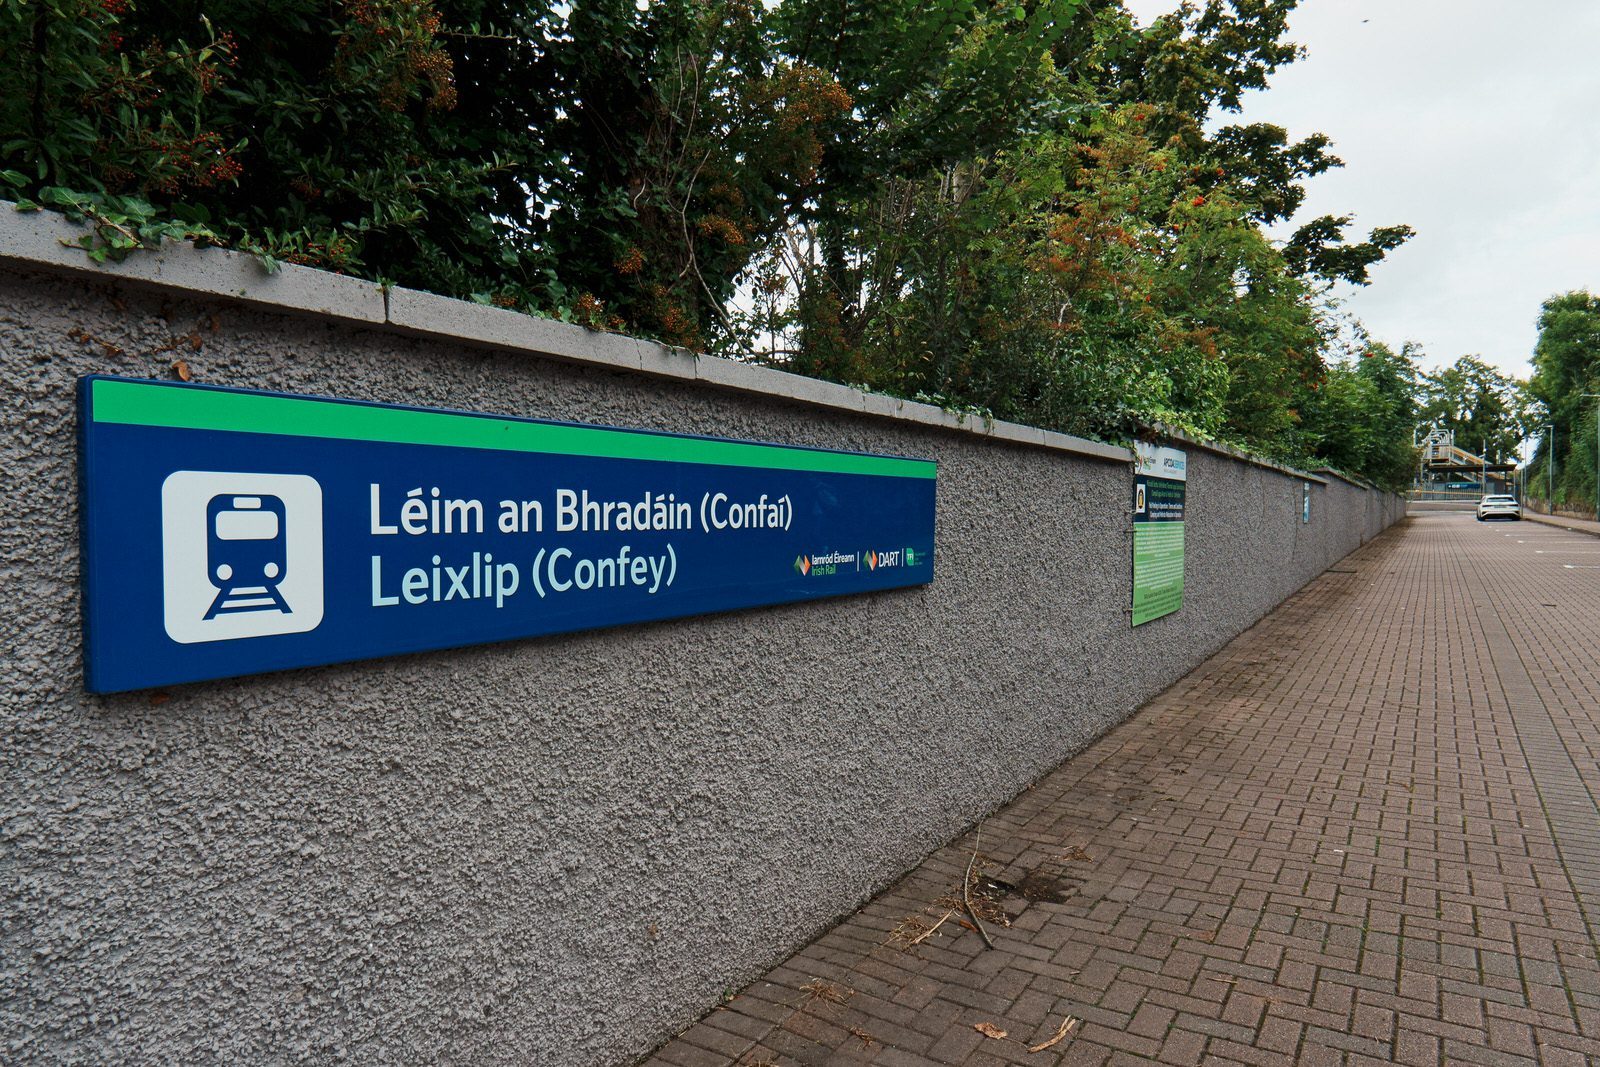 THERE ARE TWO TRAIN STATIONS IN LEIXLIP AND I USED BOTH TODAY [THIS ONE IS CONFEY] 006